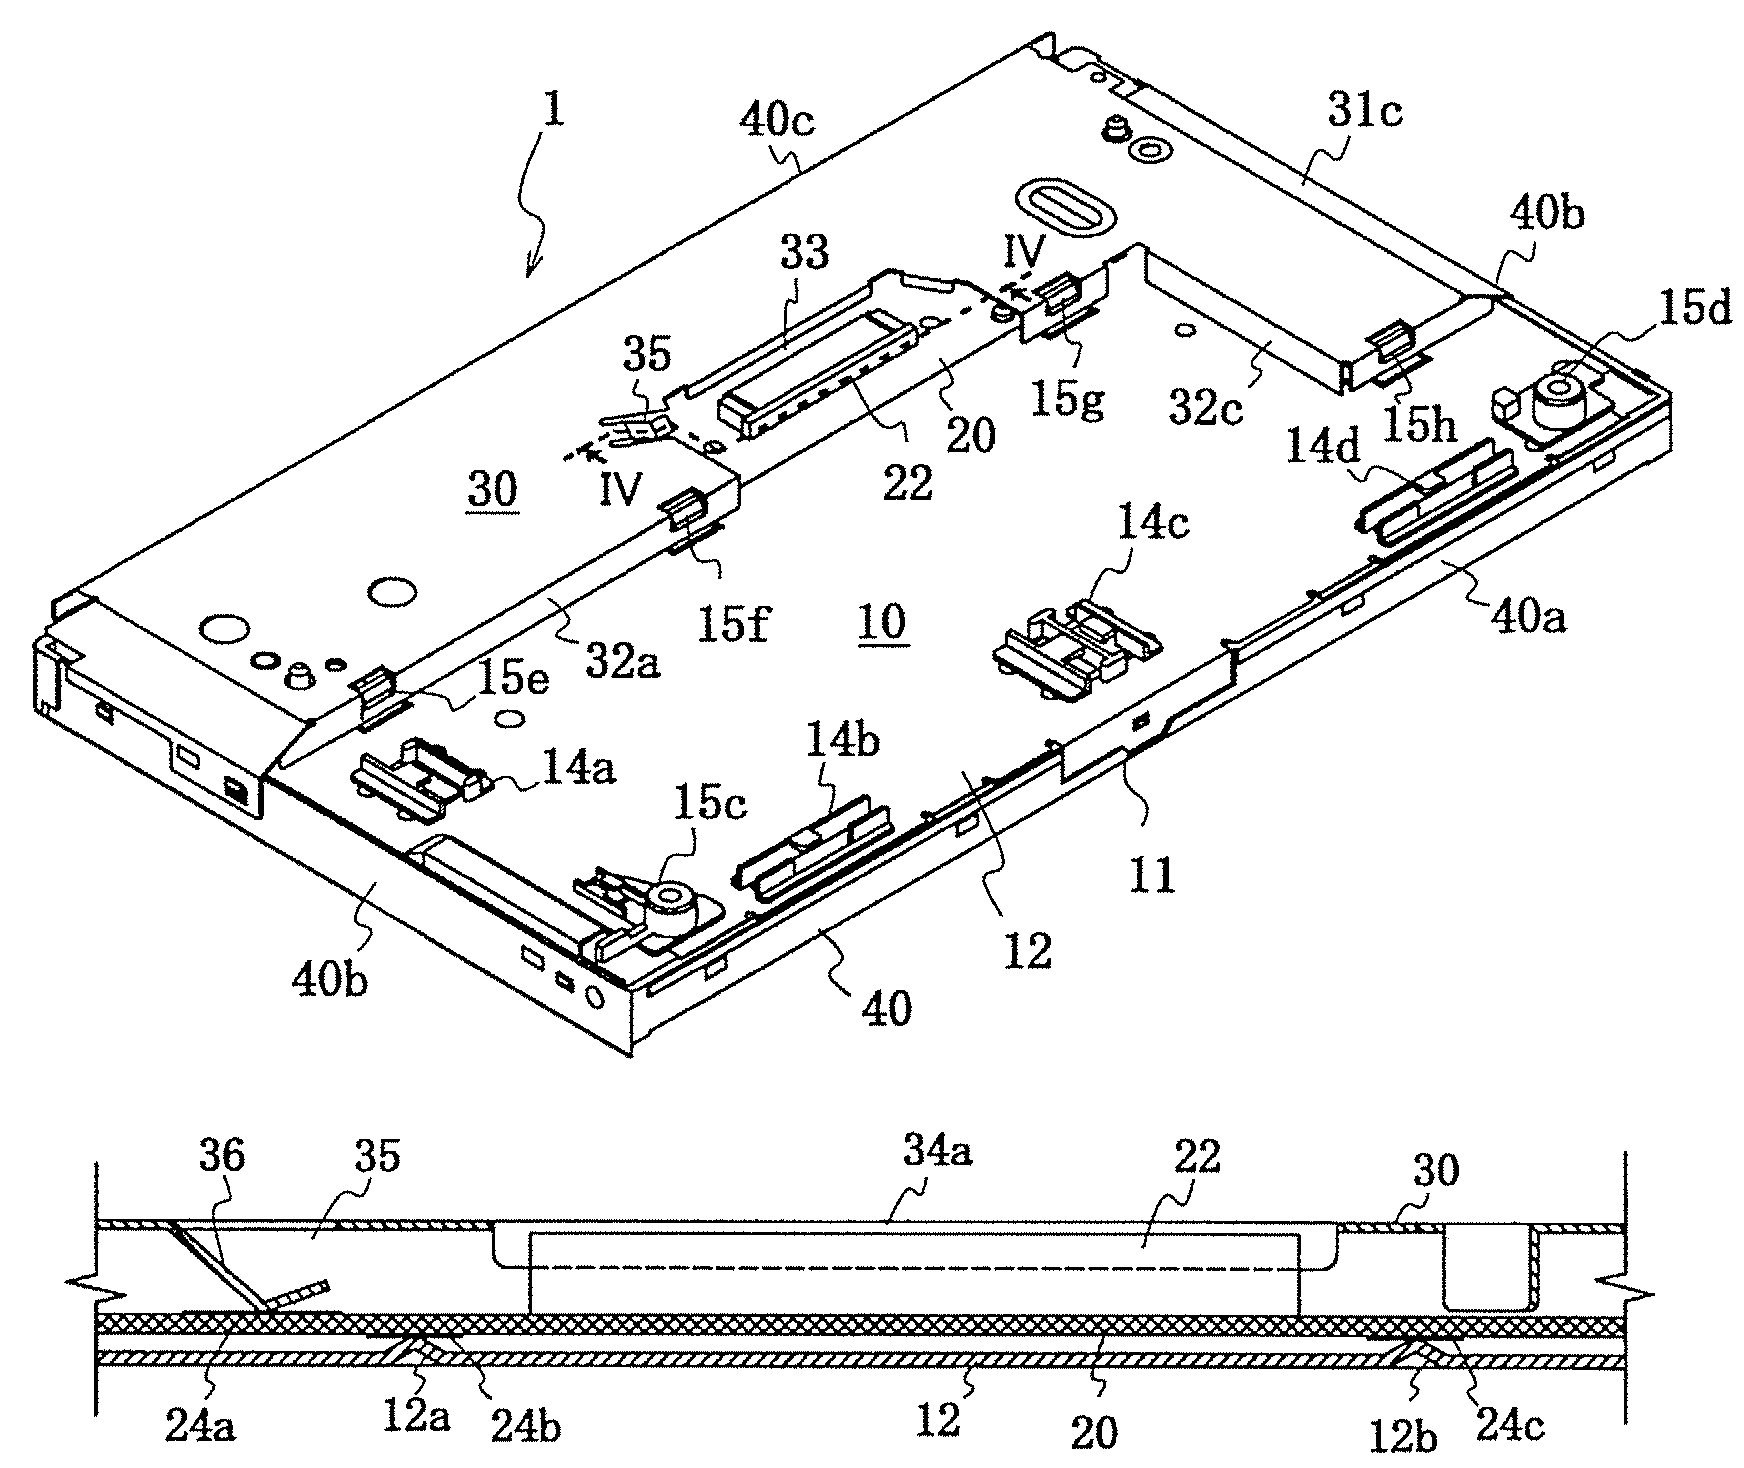 Liquid crystal display with elastic ground contact on first side and multiple ground contacts on second side of drive circuit board